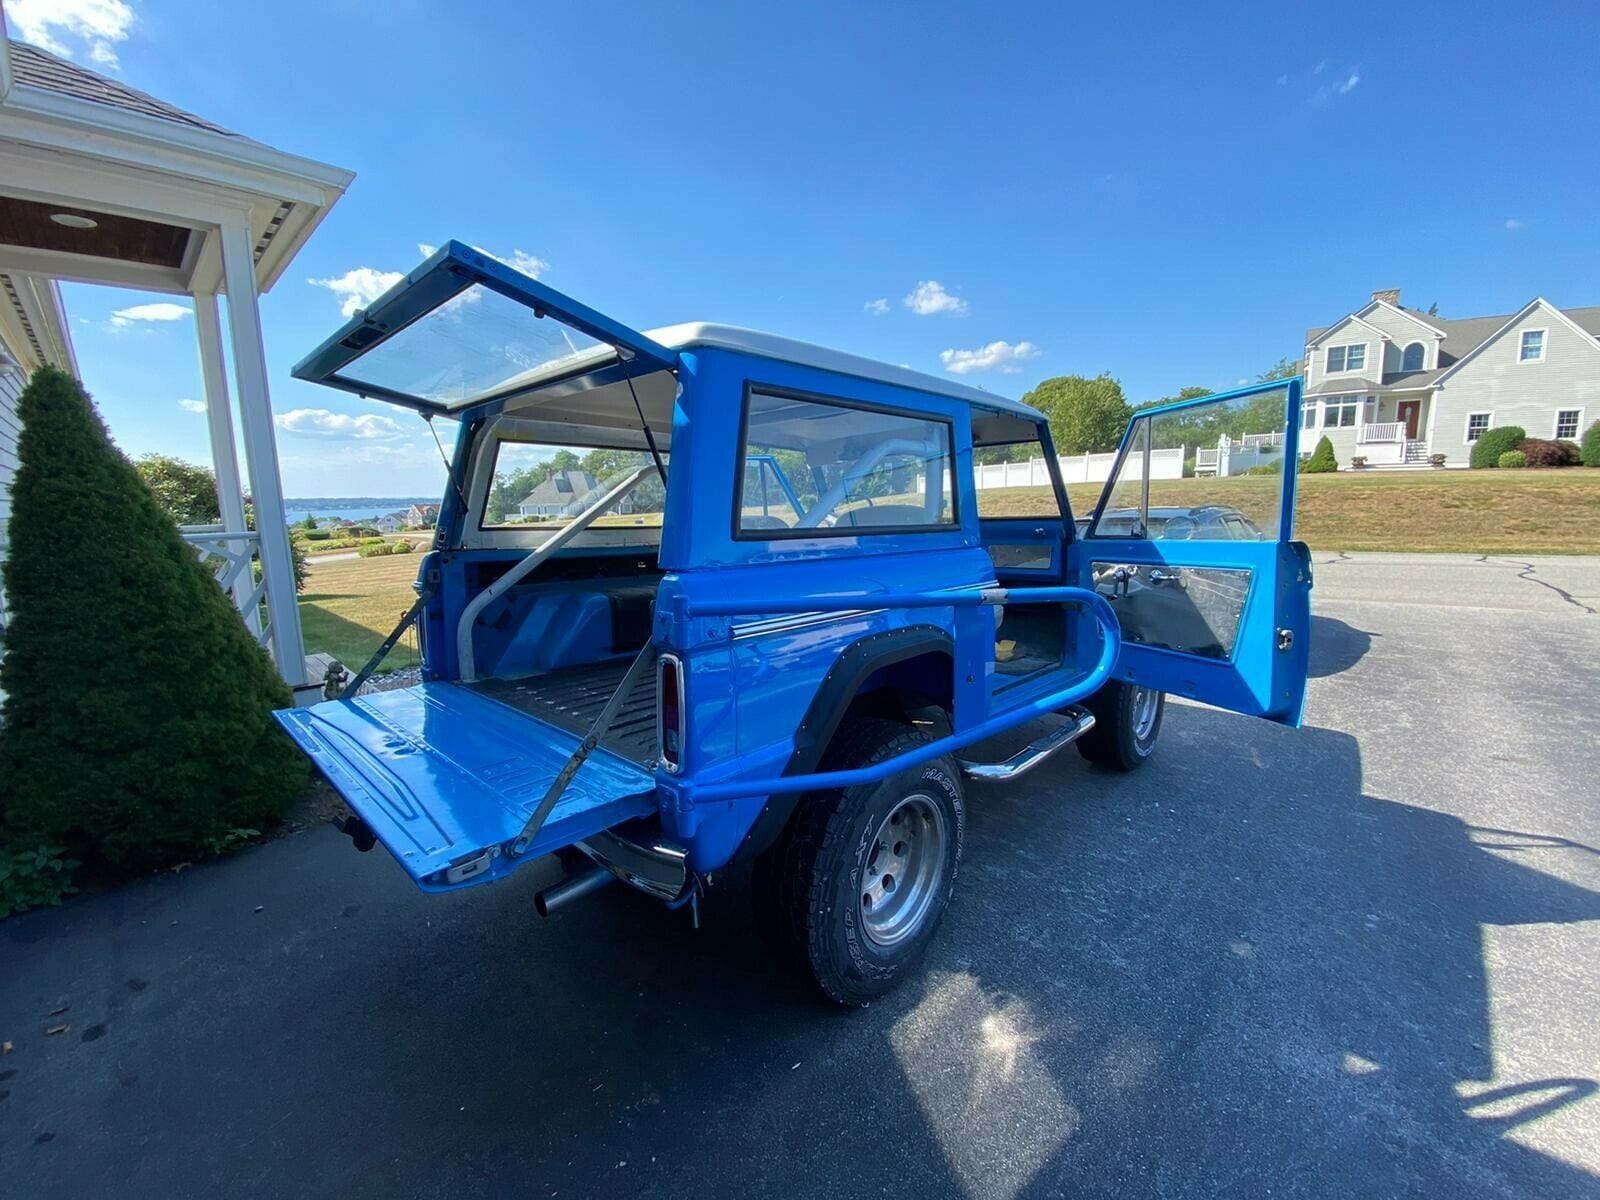 An old Ford Bronco sitting in a driveway. (Blue 1967 Ford Bronco)